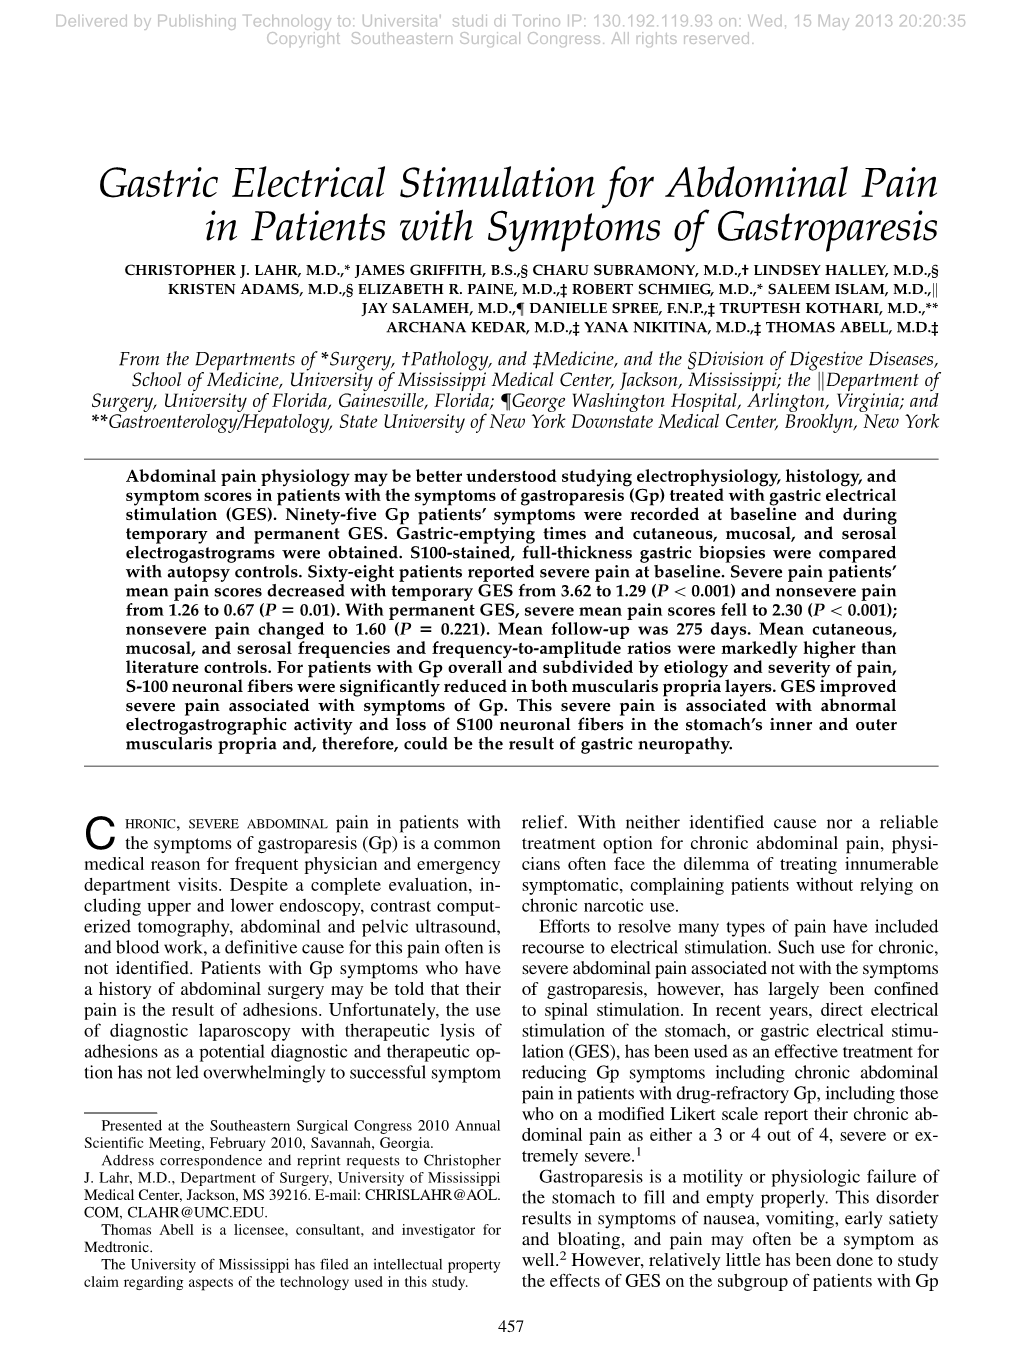 Gastric Electrical Stimulation for Abdominal Pain in Patients with Symptoms of Gastroparesis CHRISTOPHER J